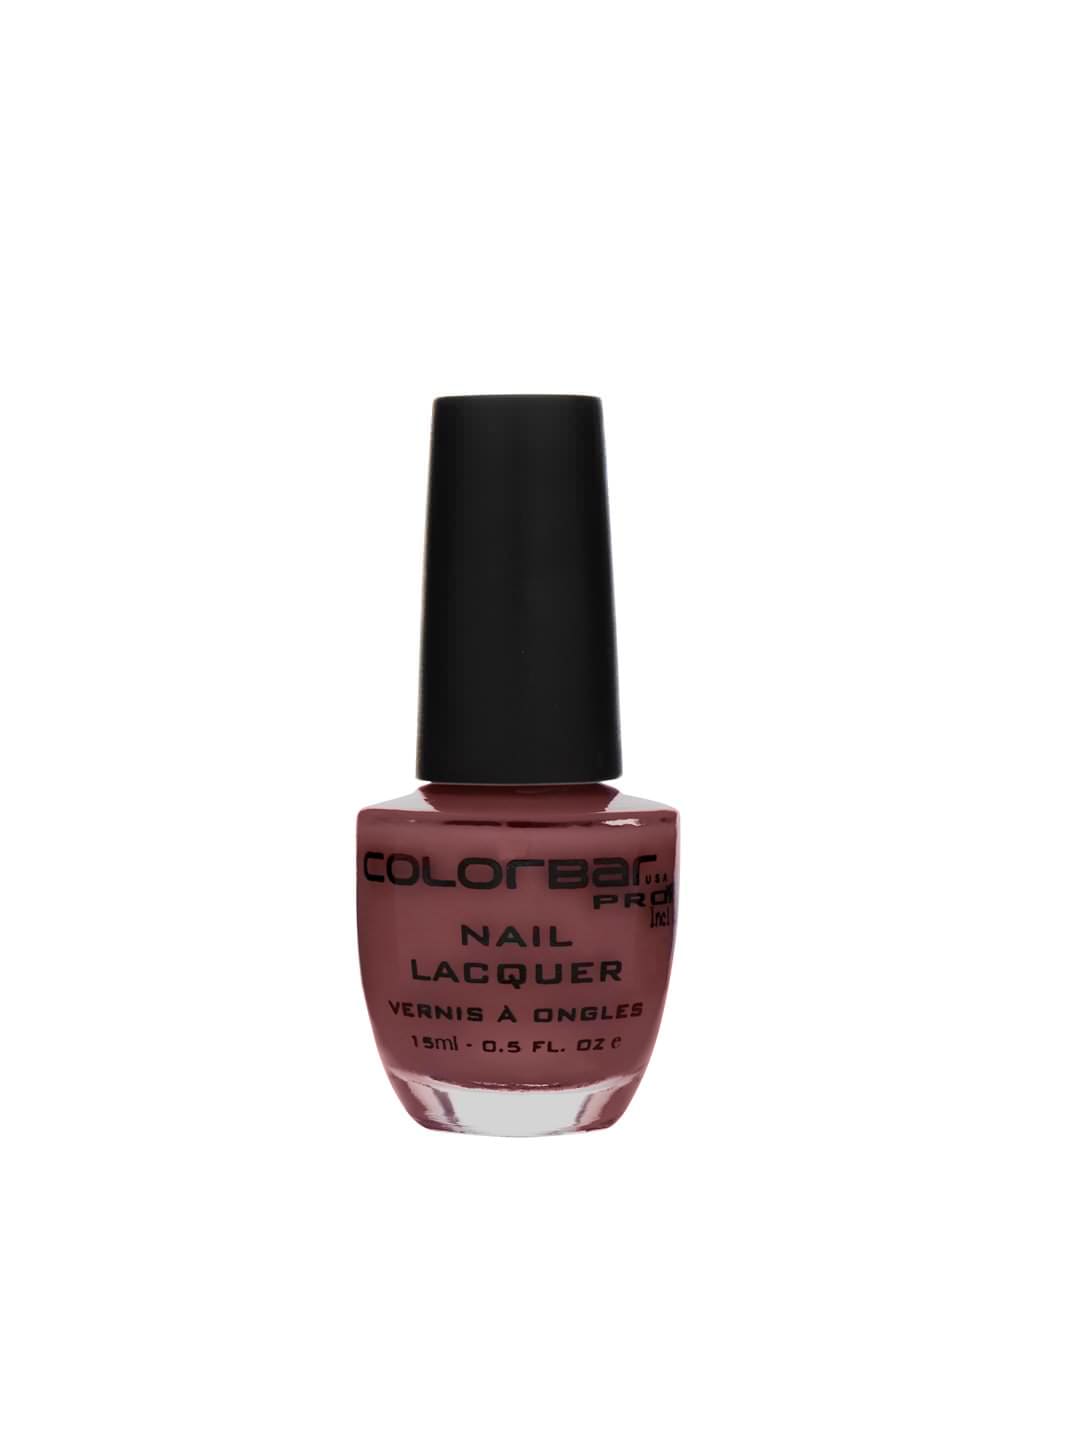 Colorbar Pro Pink Late Nail Lacquer 056